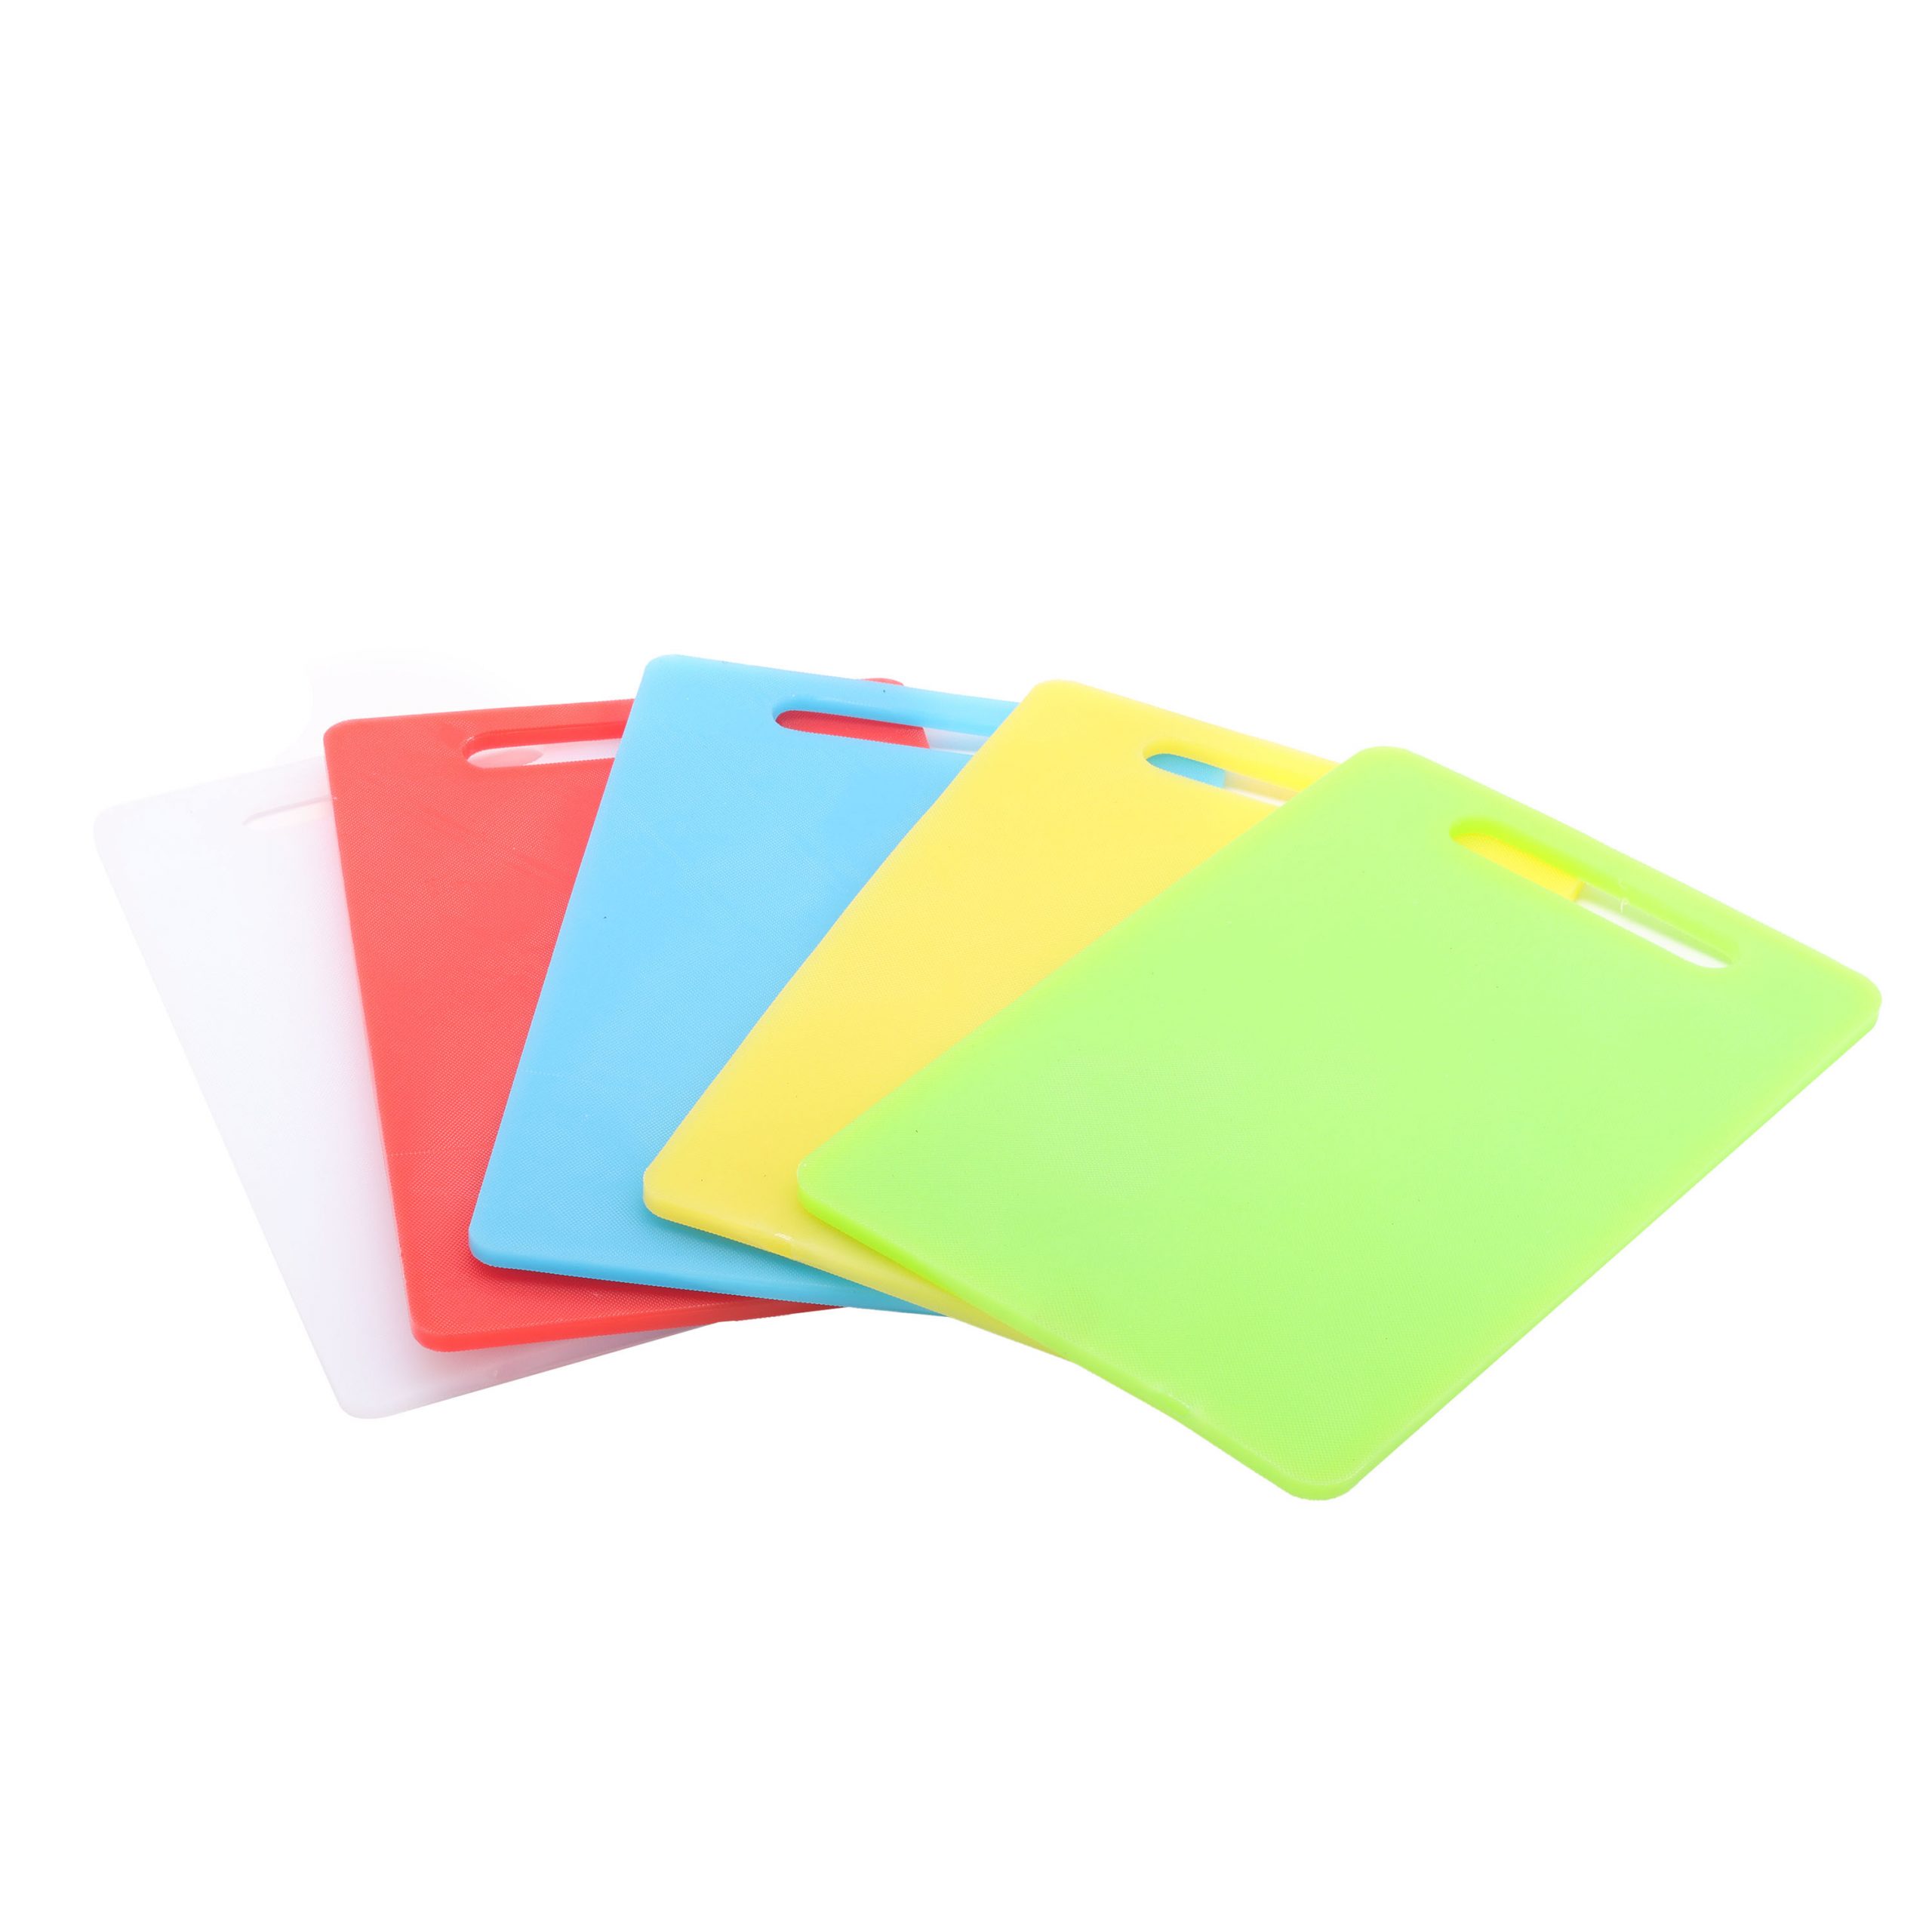 Chopping Board - Comcom Foodservice Supplies Corp